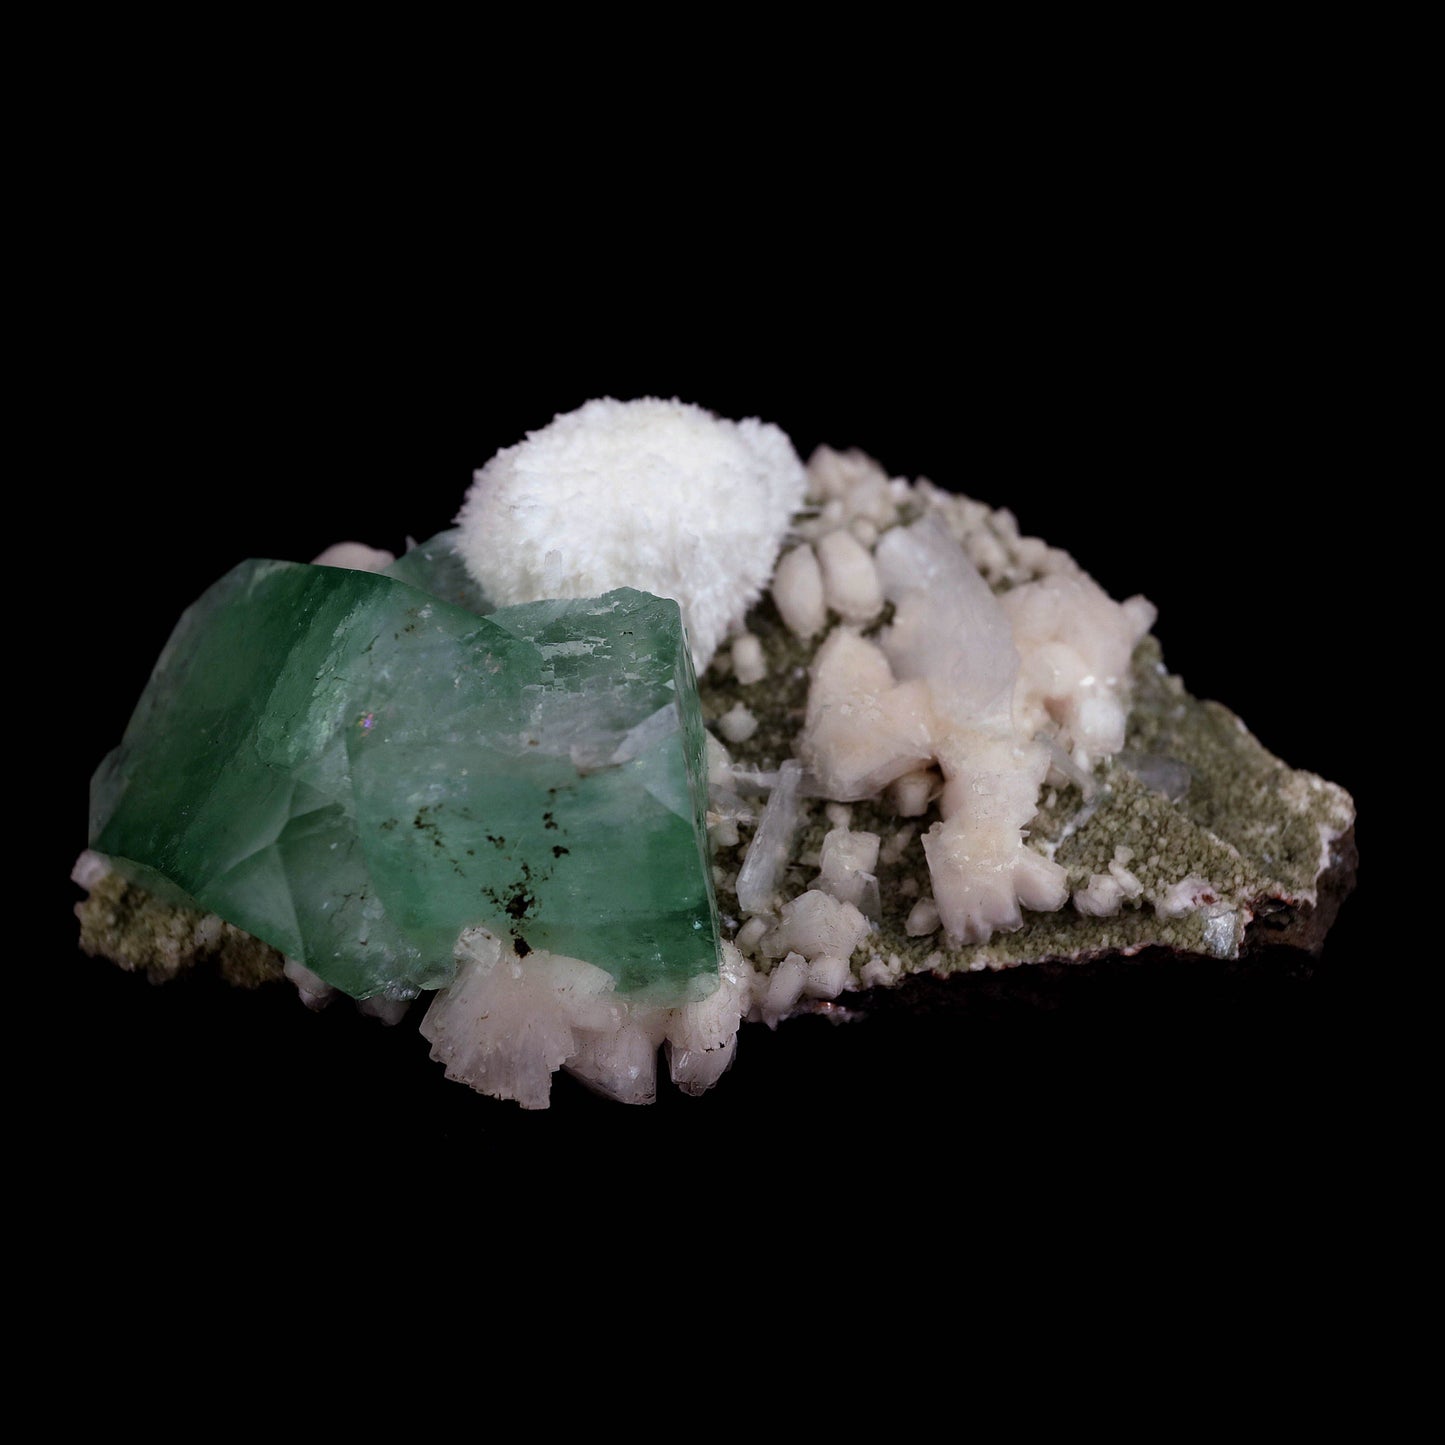 Pesudo Green Apophyllite with Mordenite Stilbite Natural Mineral Speci…  https://www.superbminerals.us/products/pesudo-green-apophyllite-with-mordenite-stilbite-natural-mineral-specimen-b-4602  Features:The gemmy and glossy light mint-green apophyllite crystals on this extremely attractive specimen from Jalgaon are complemented with snow-white spikeballs of brittle mordenite needles. Atop the green, some of the apophyllite crystal terminations became colourless. This is a reasonably rare and exceptional 